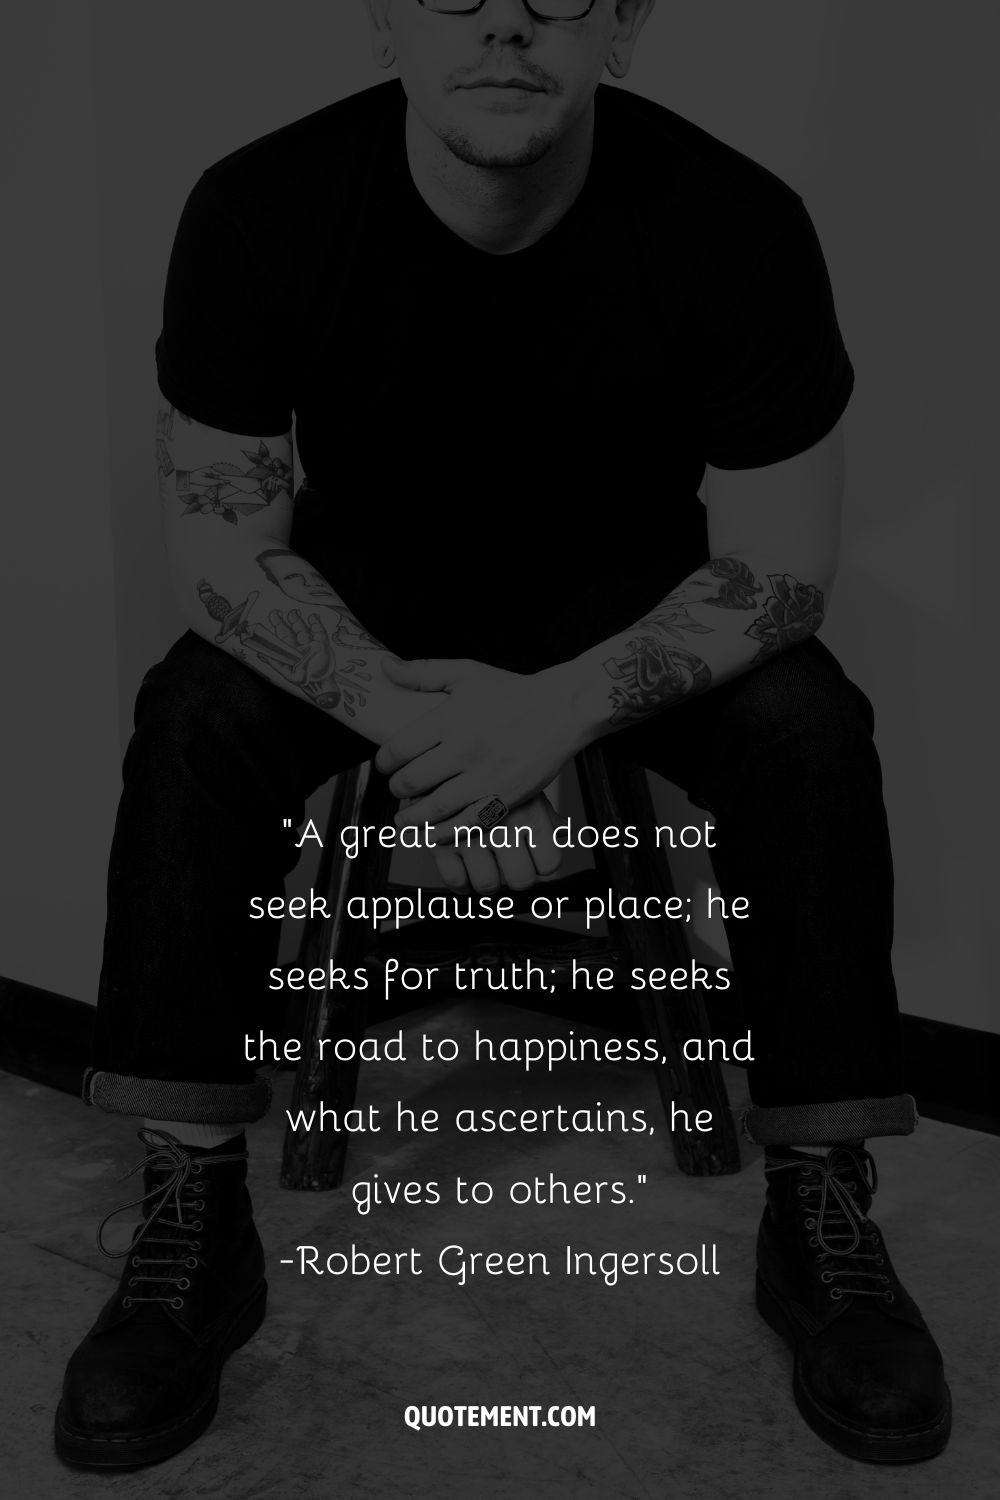 tattooed guy sitting representing inspirational quote for men